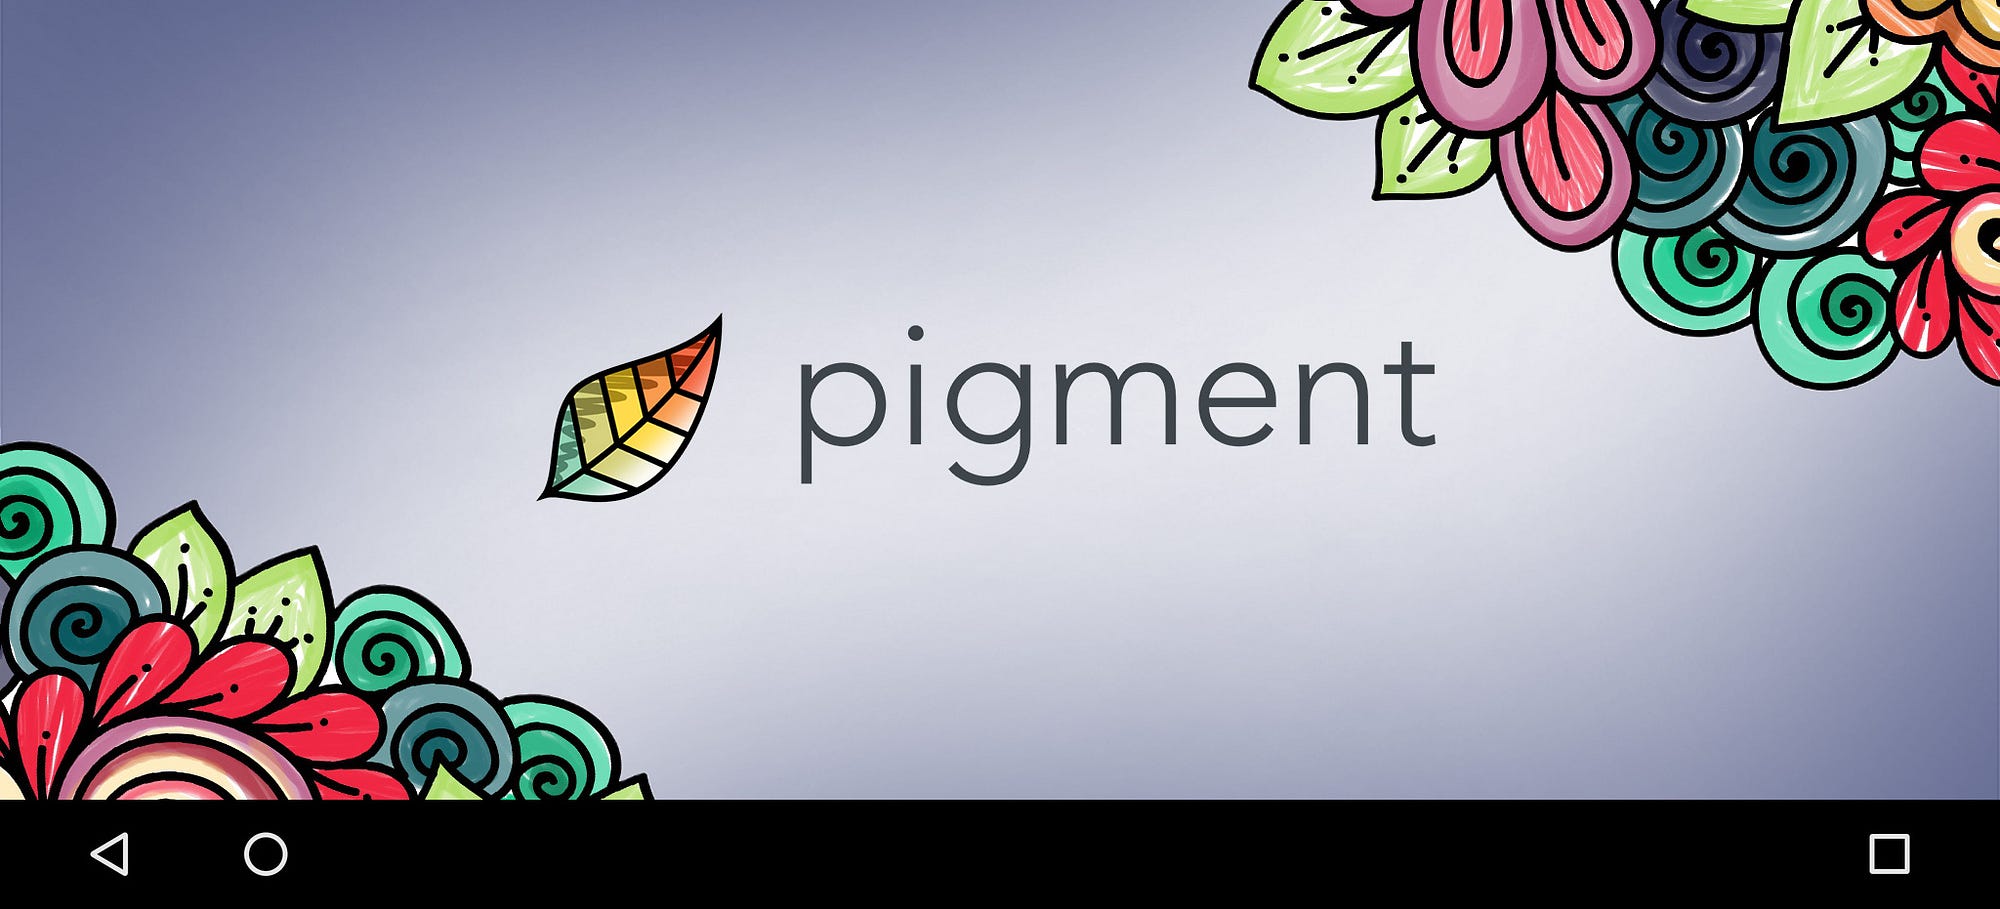 Download Pigment One Of Year S Best Apps On The App Store Now Available On Android By Pixite Medium